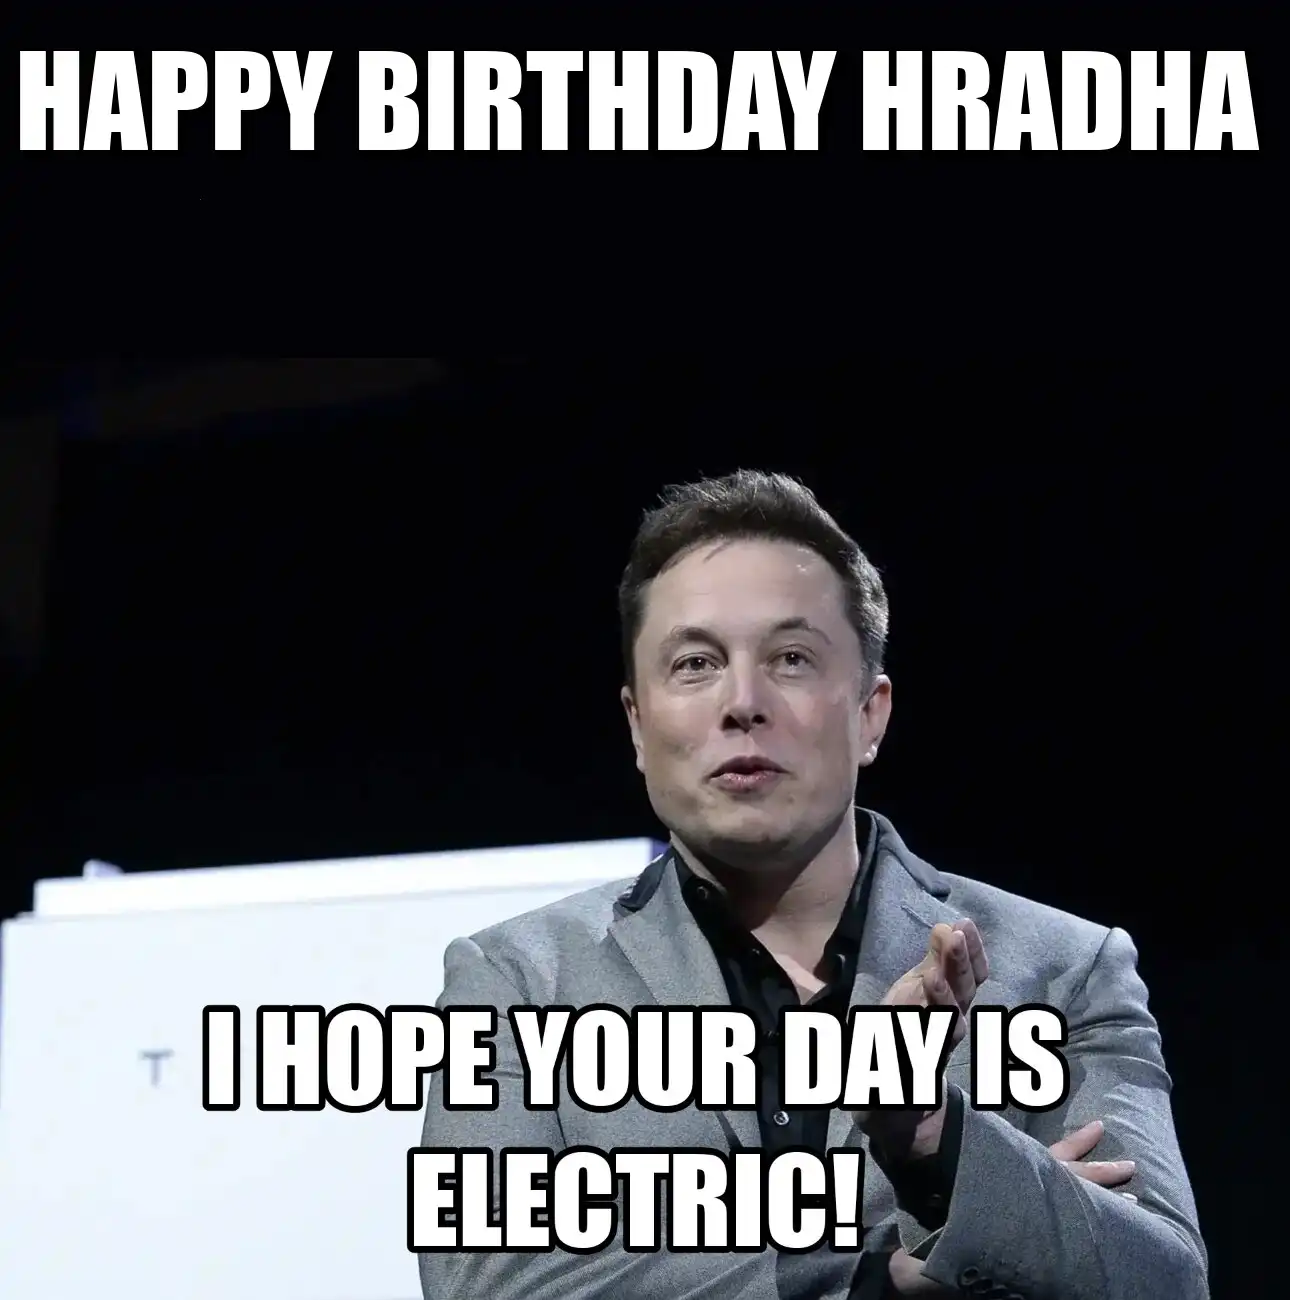 Happy Birthday Hradha I Hope Your Day Is Electric Meme